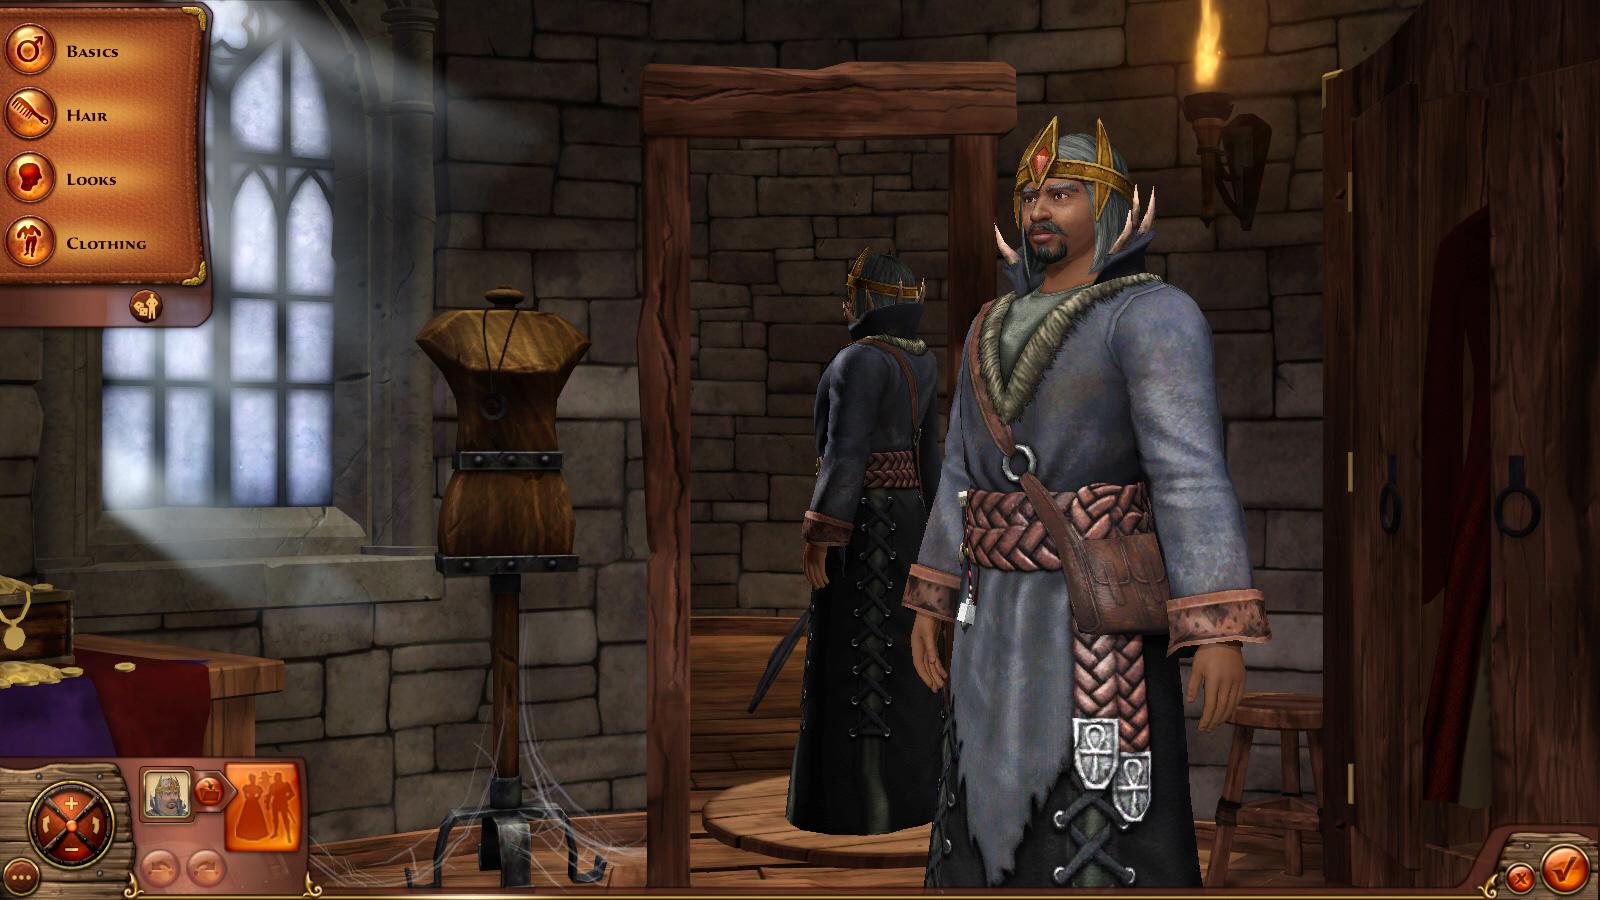 sims medieval online free no download